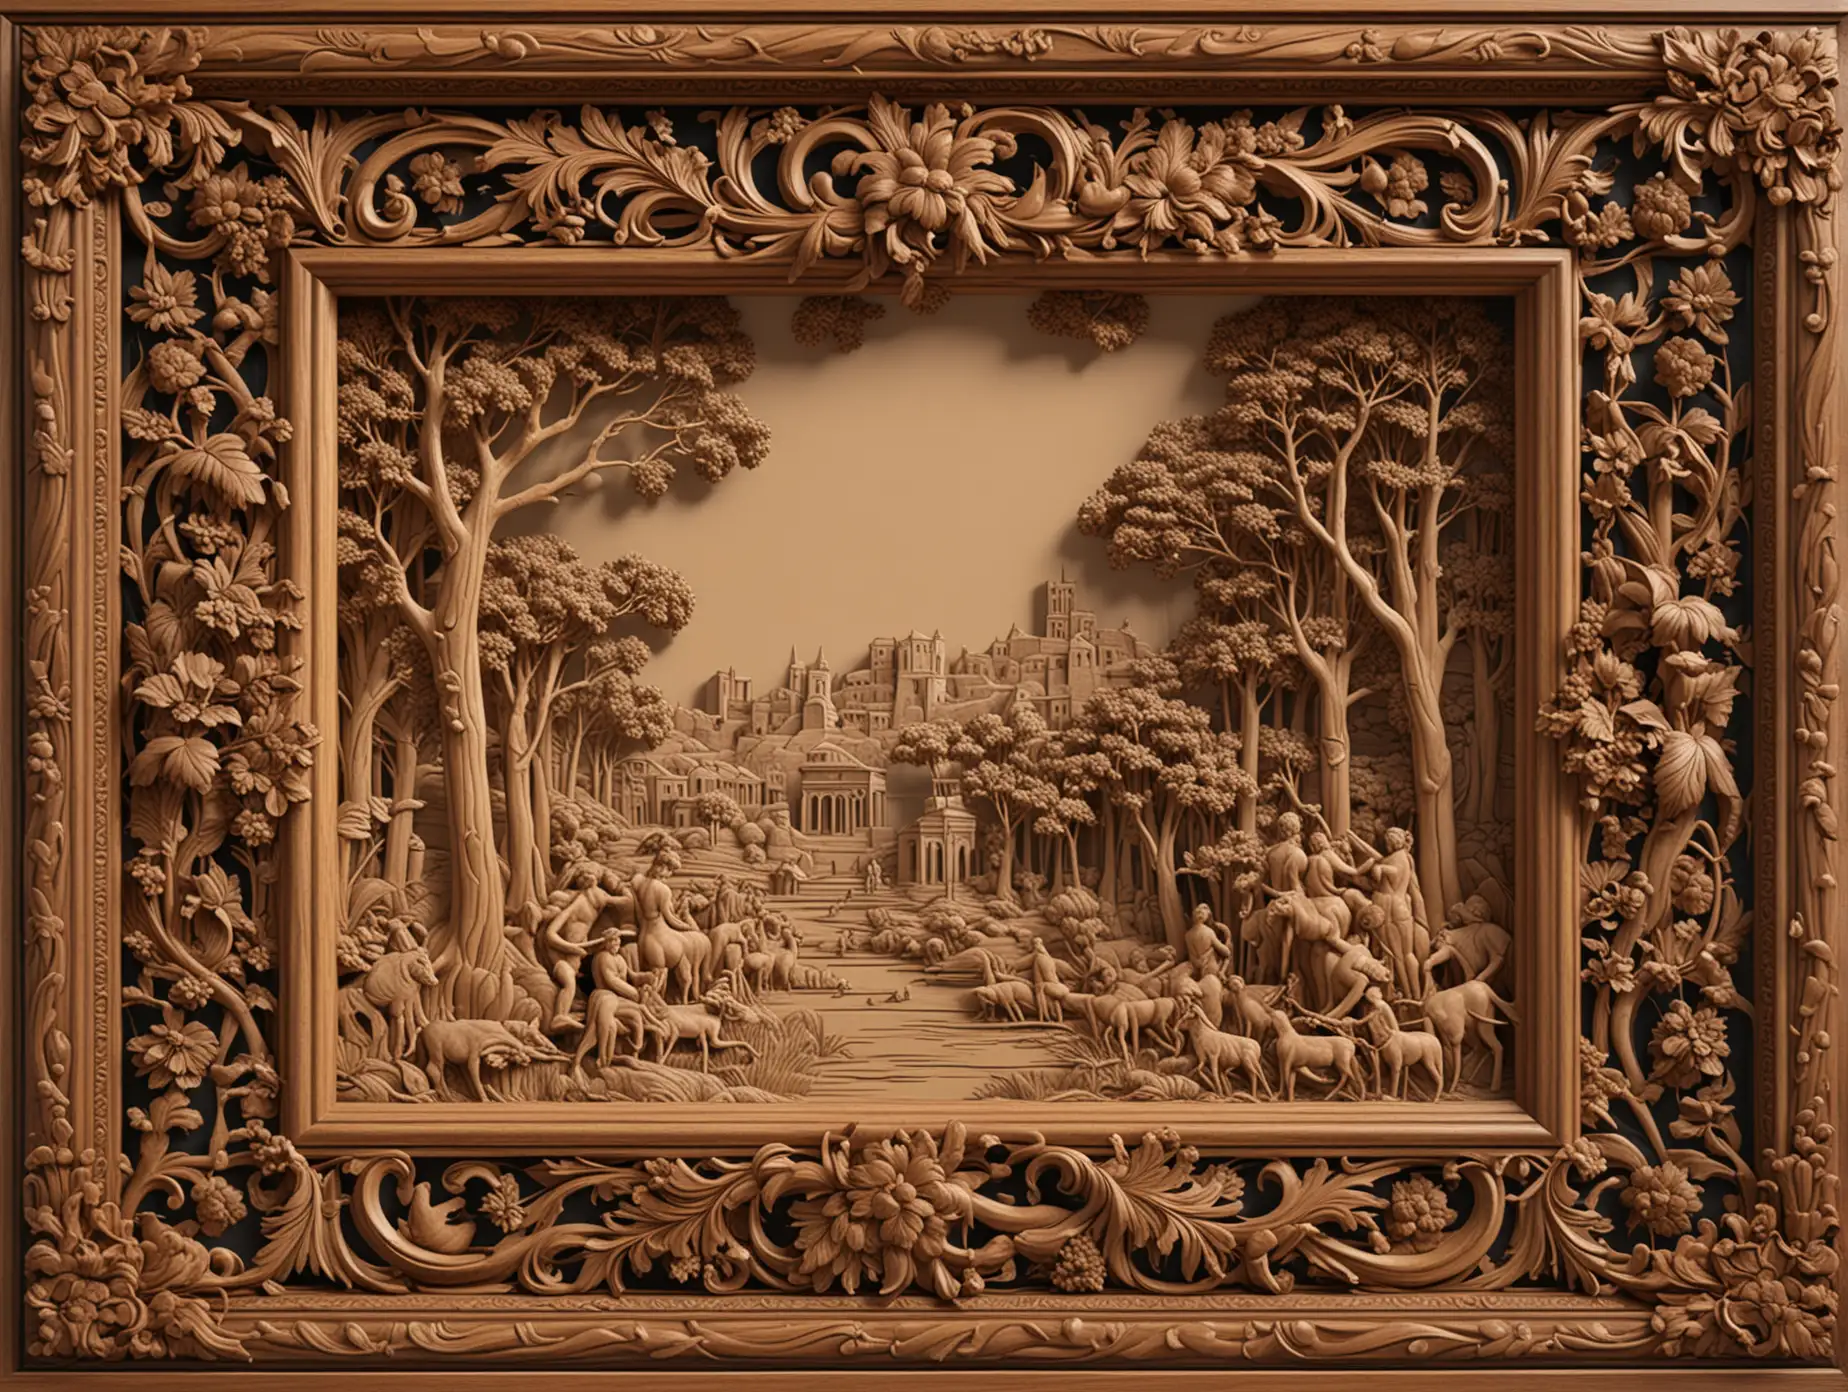 3d and tilable wood lacquer frame surround, featuring a finely carved wooden scene from Rome in the style of Aubrey beardsley